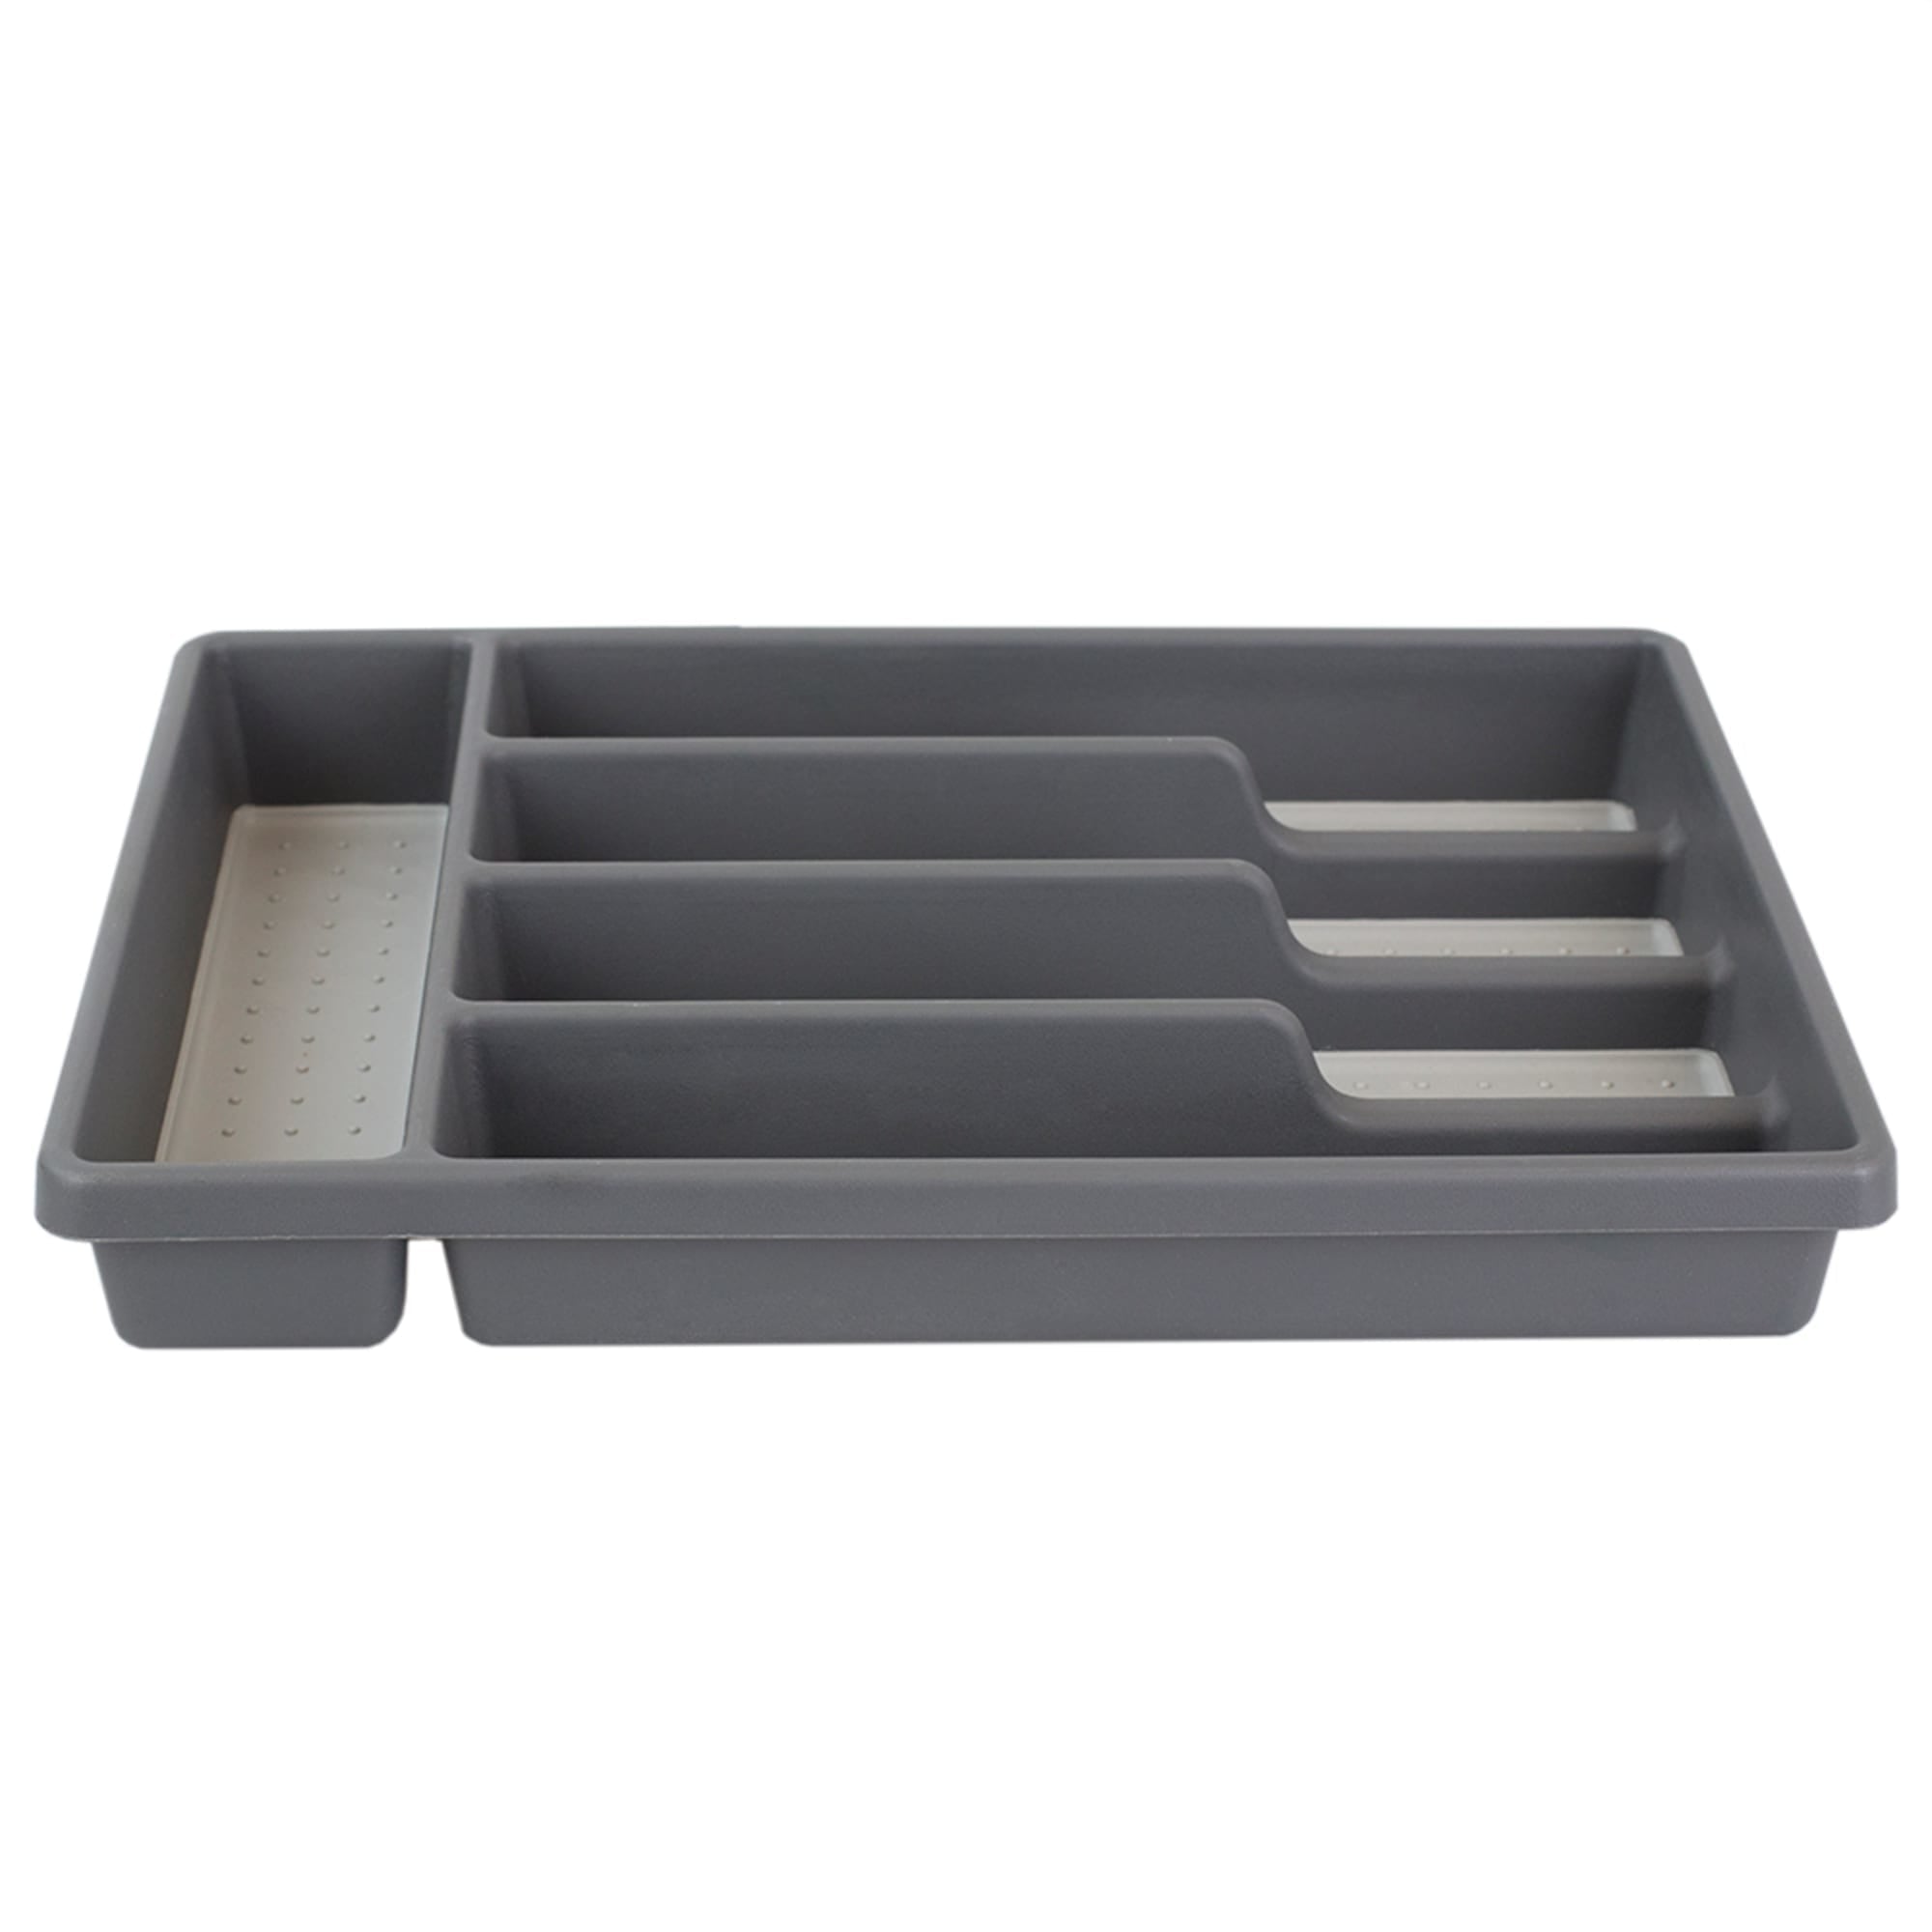 Home Basics Plastic Flatware Organizer with Rubber Liner, Light Grey $5.00 EACH, CASE PACK OF 12